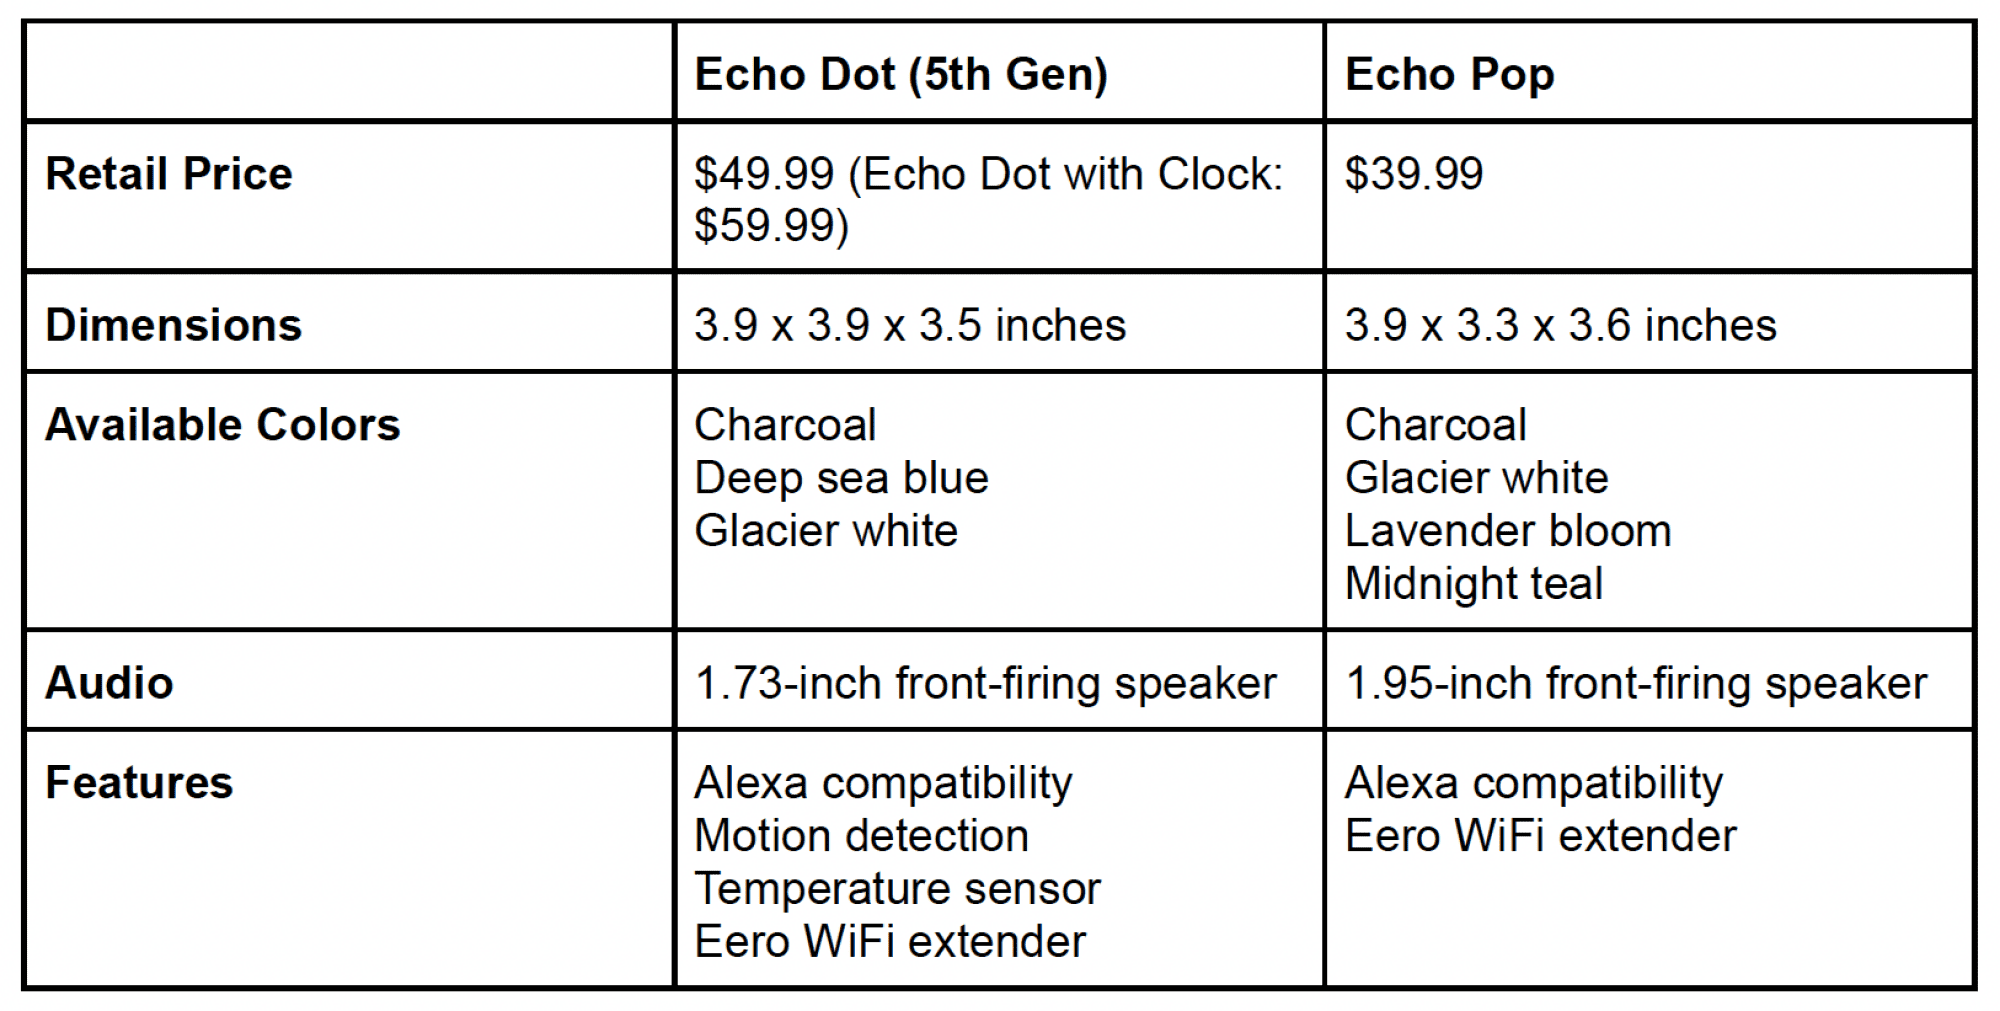 Echo Dot vs Echo Pop: Which Amazon Device is Best for You?